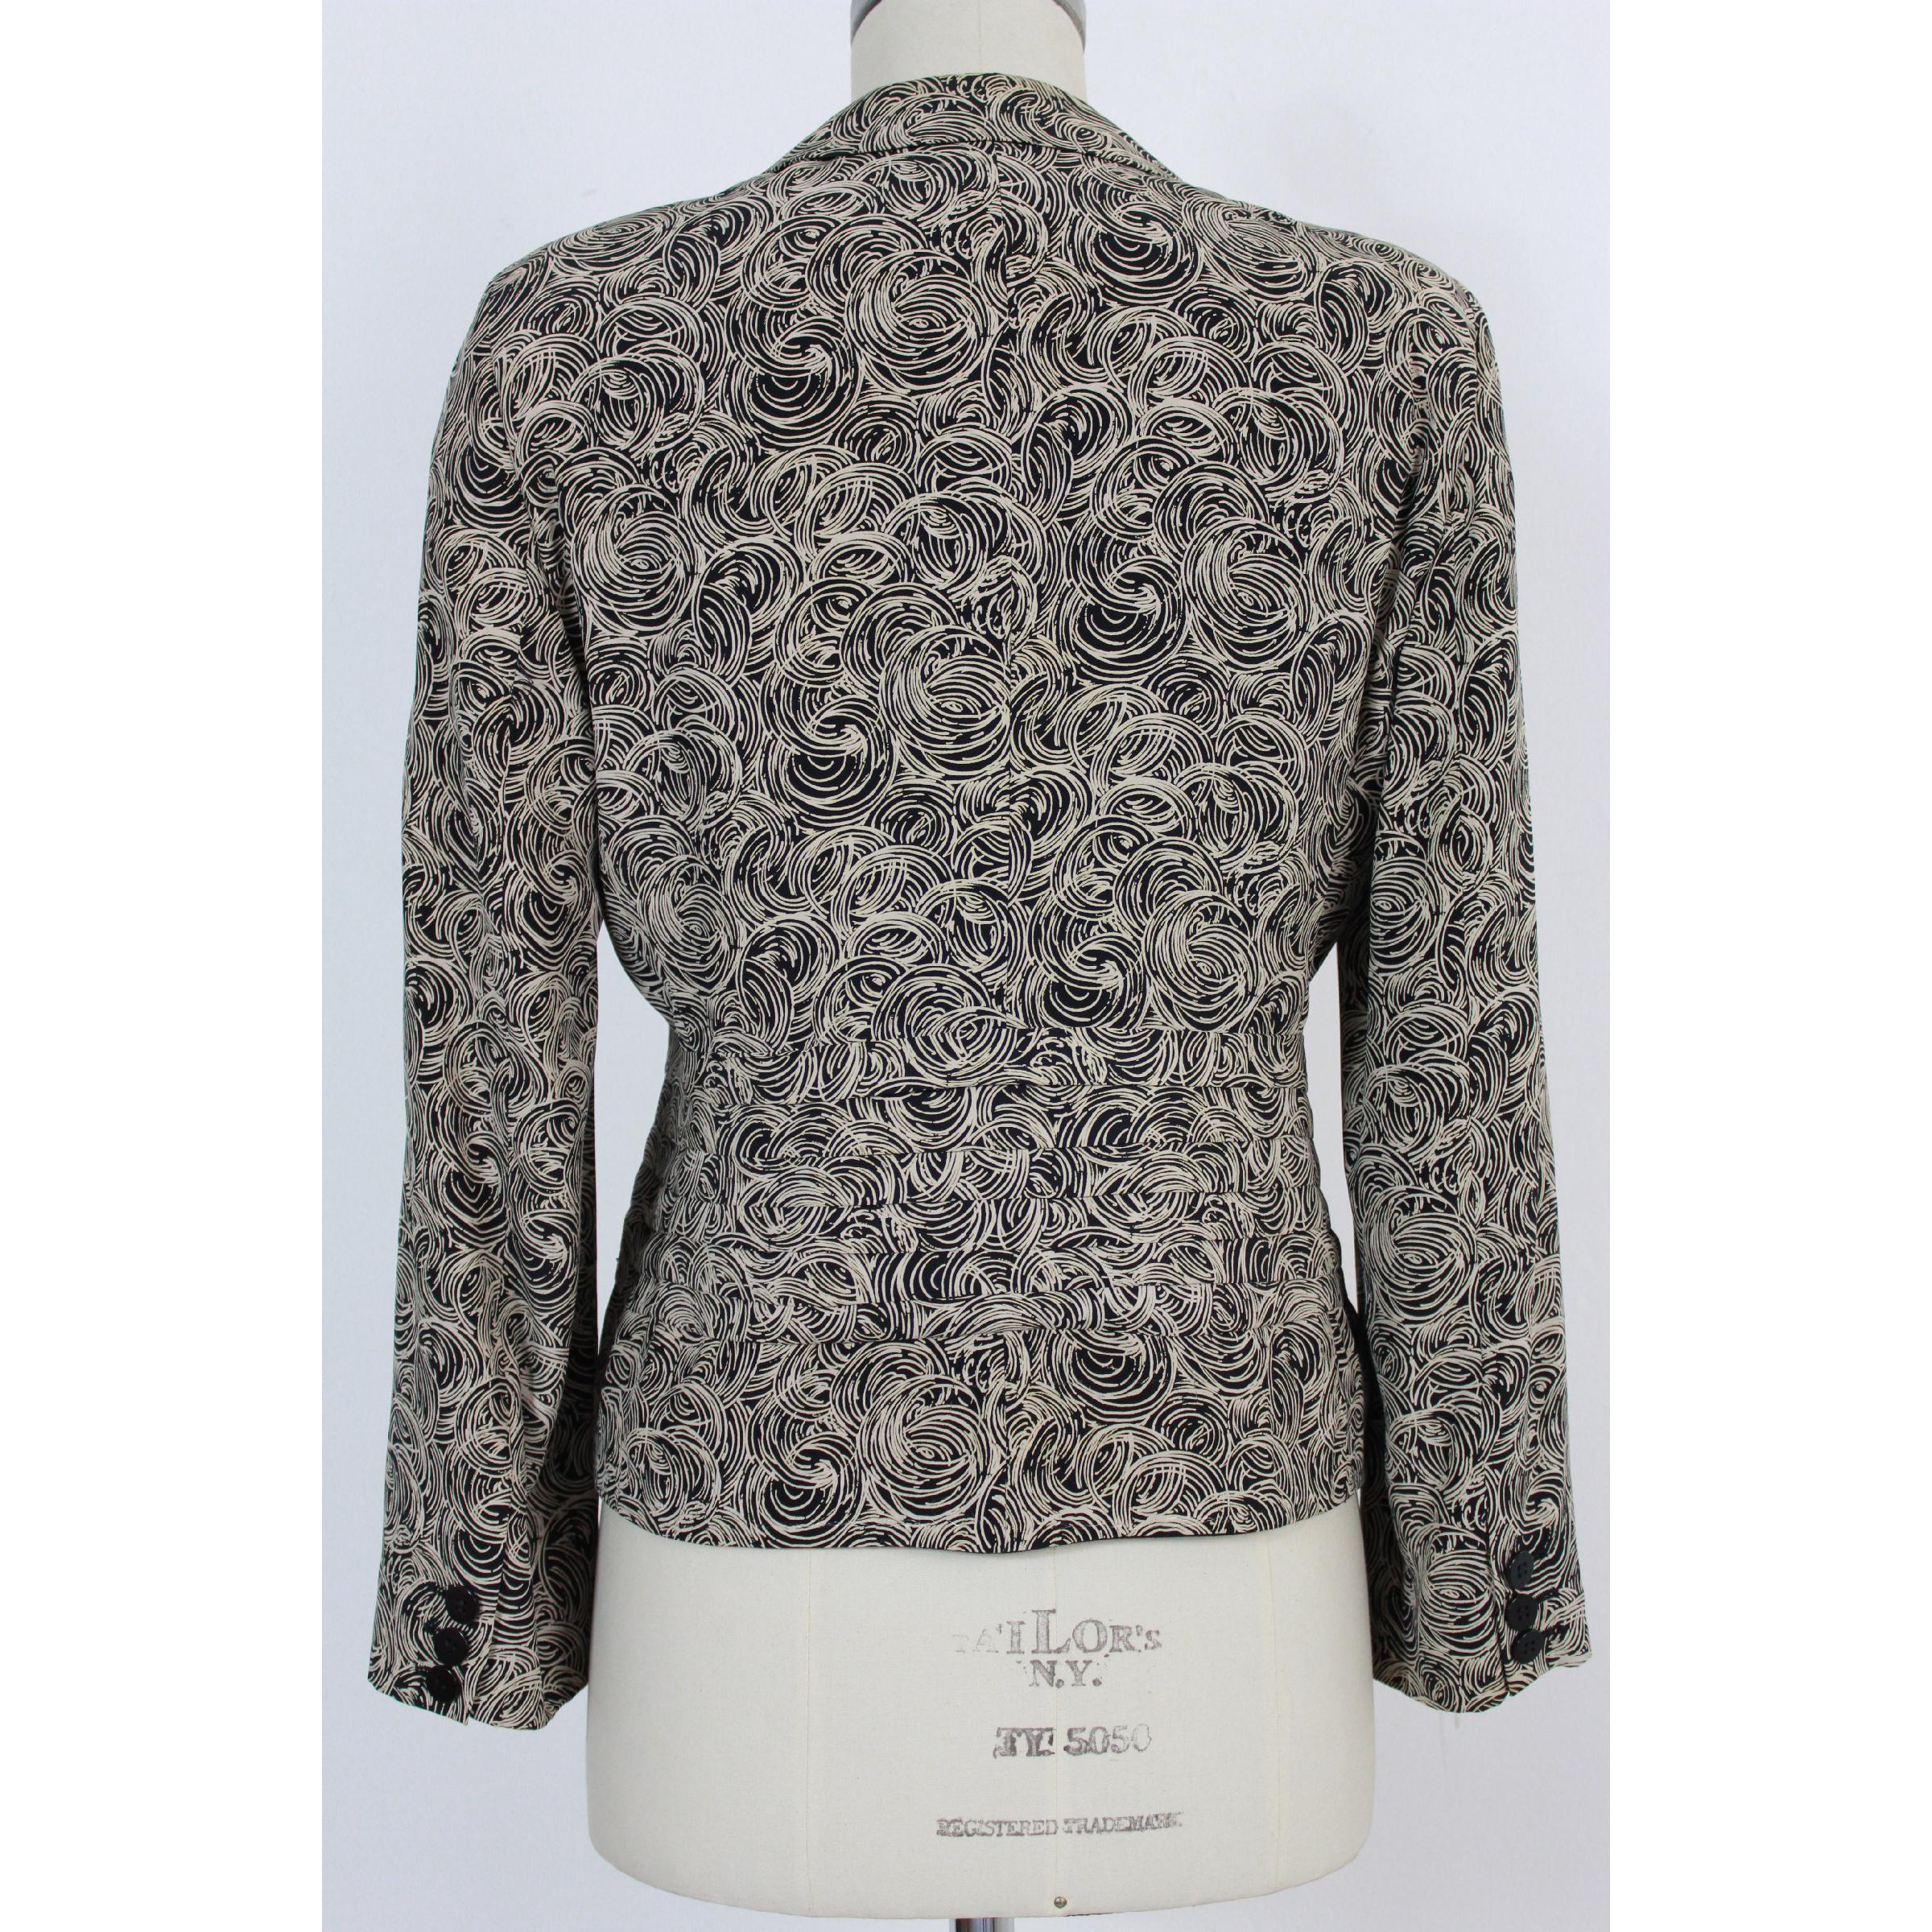 Vintage Giorgio Armani women's jacket. White and black in silk. Bow closure, print with geometric designs. 90s. Made in Italy. Excellent vintage condition. 

Size: 44 It 10 Us 12 Uk 

Shoulder: 44 cm 
Bust/Chest: 52 cm
Sleeve: 58 cm
Length: 61 cm